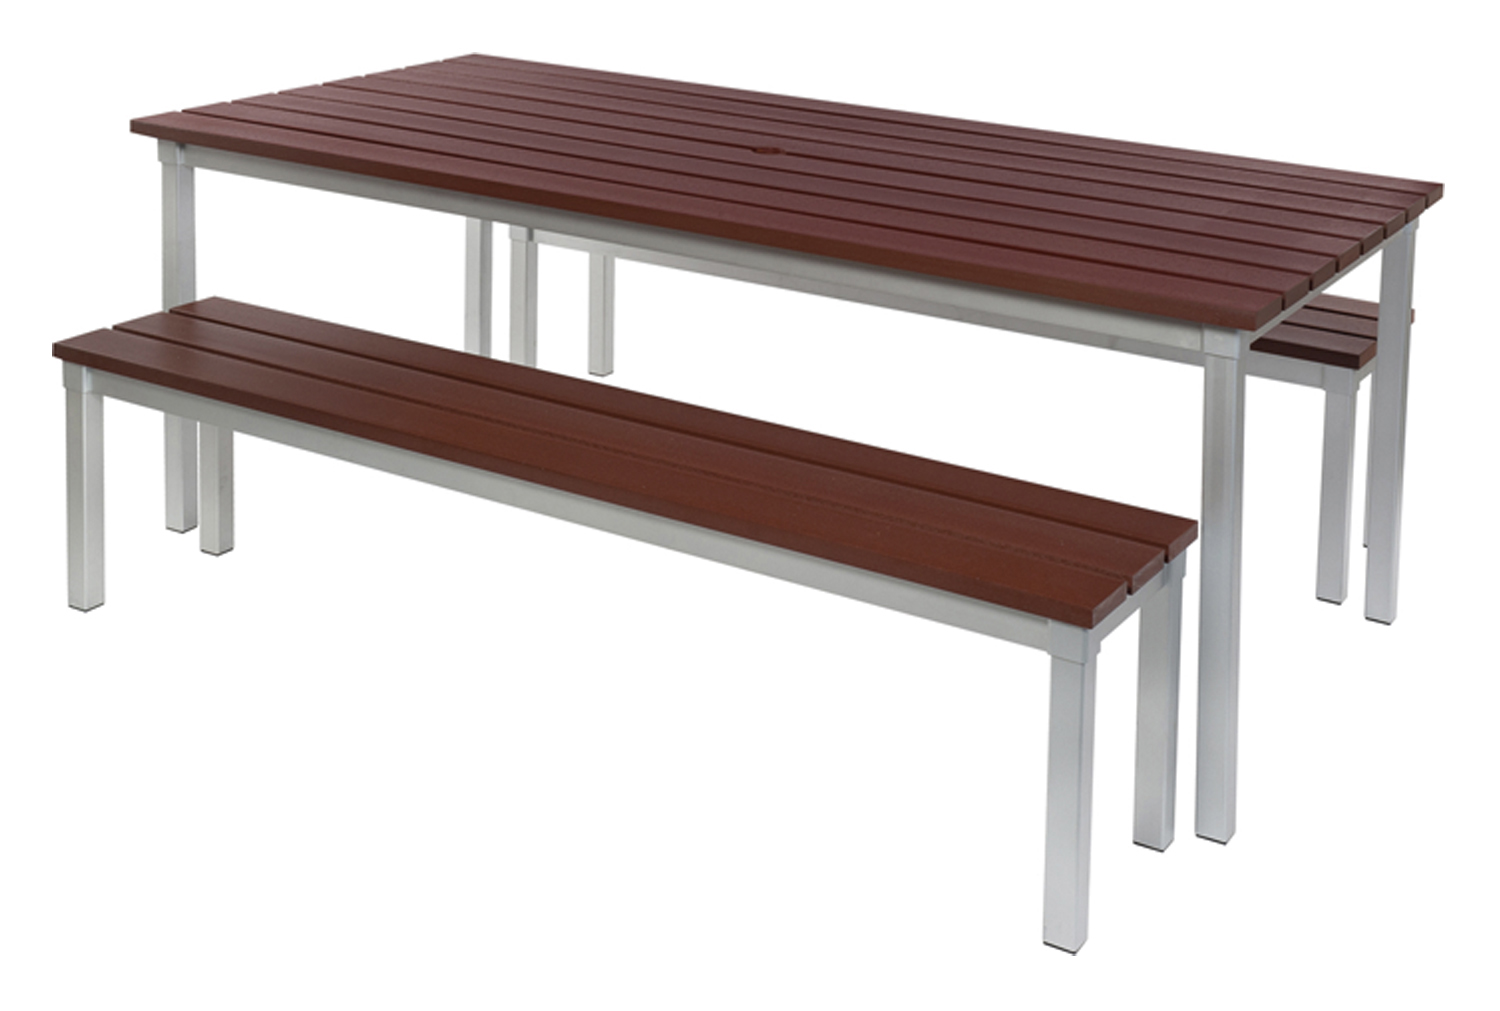 Enviro Outdoor Furniture Bundle Deal With 2 Benches, 180wx 90dx71h (cm)